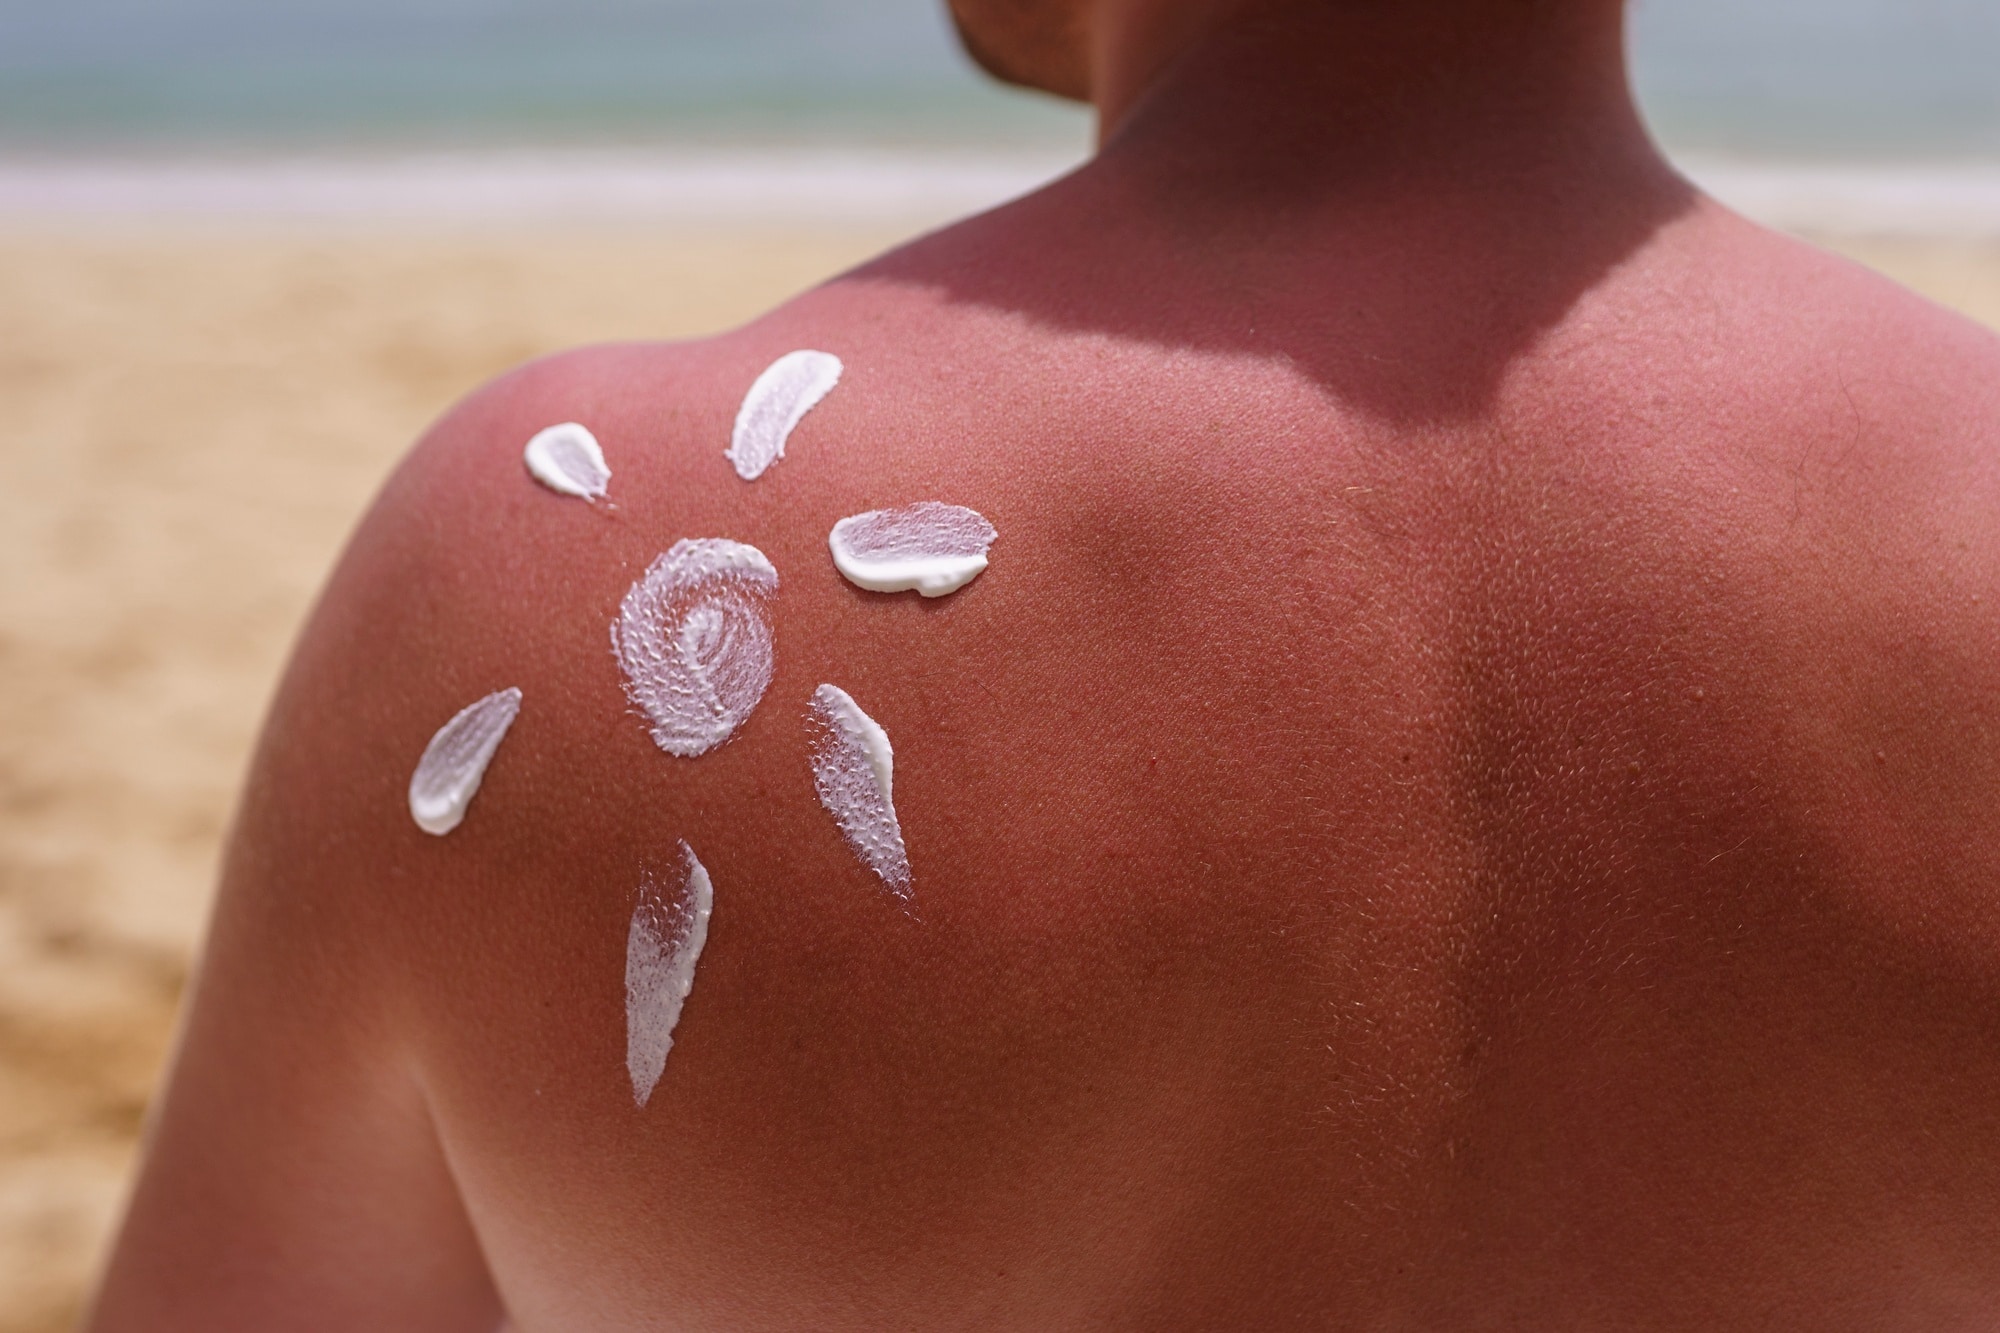 Sunburn: What Do I Need to Know?